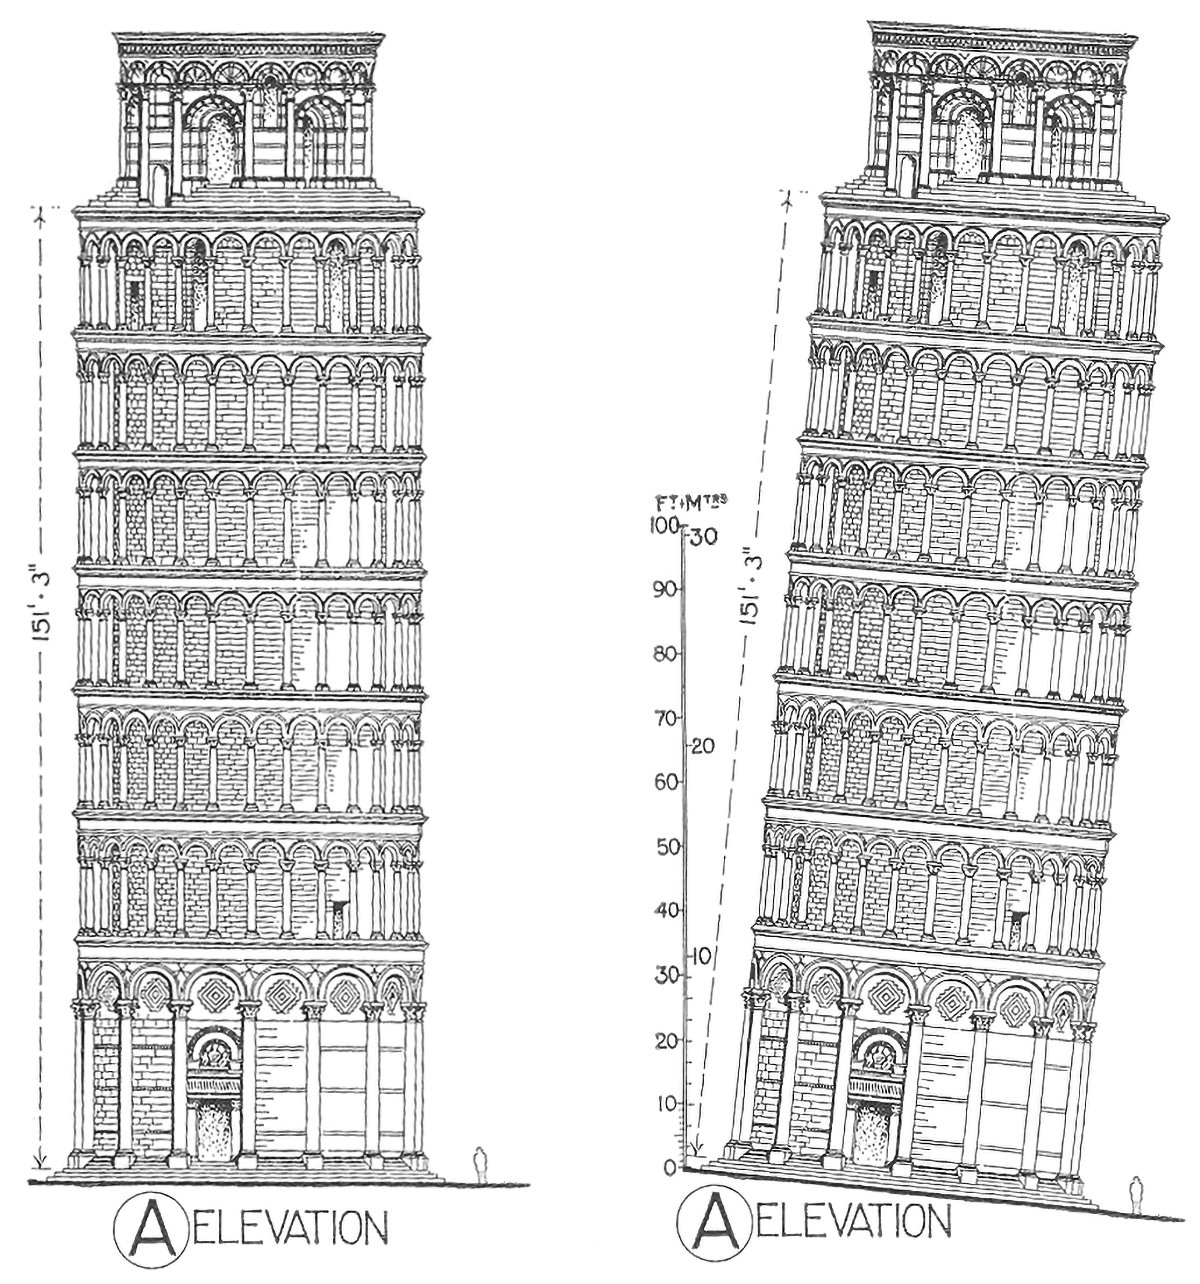 Leaning Tower of Pisa architectural drawing by John Paxton